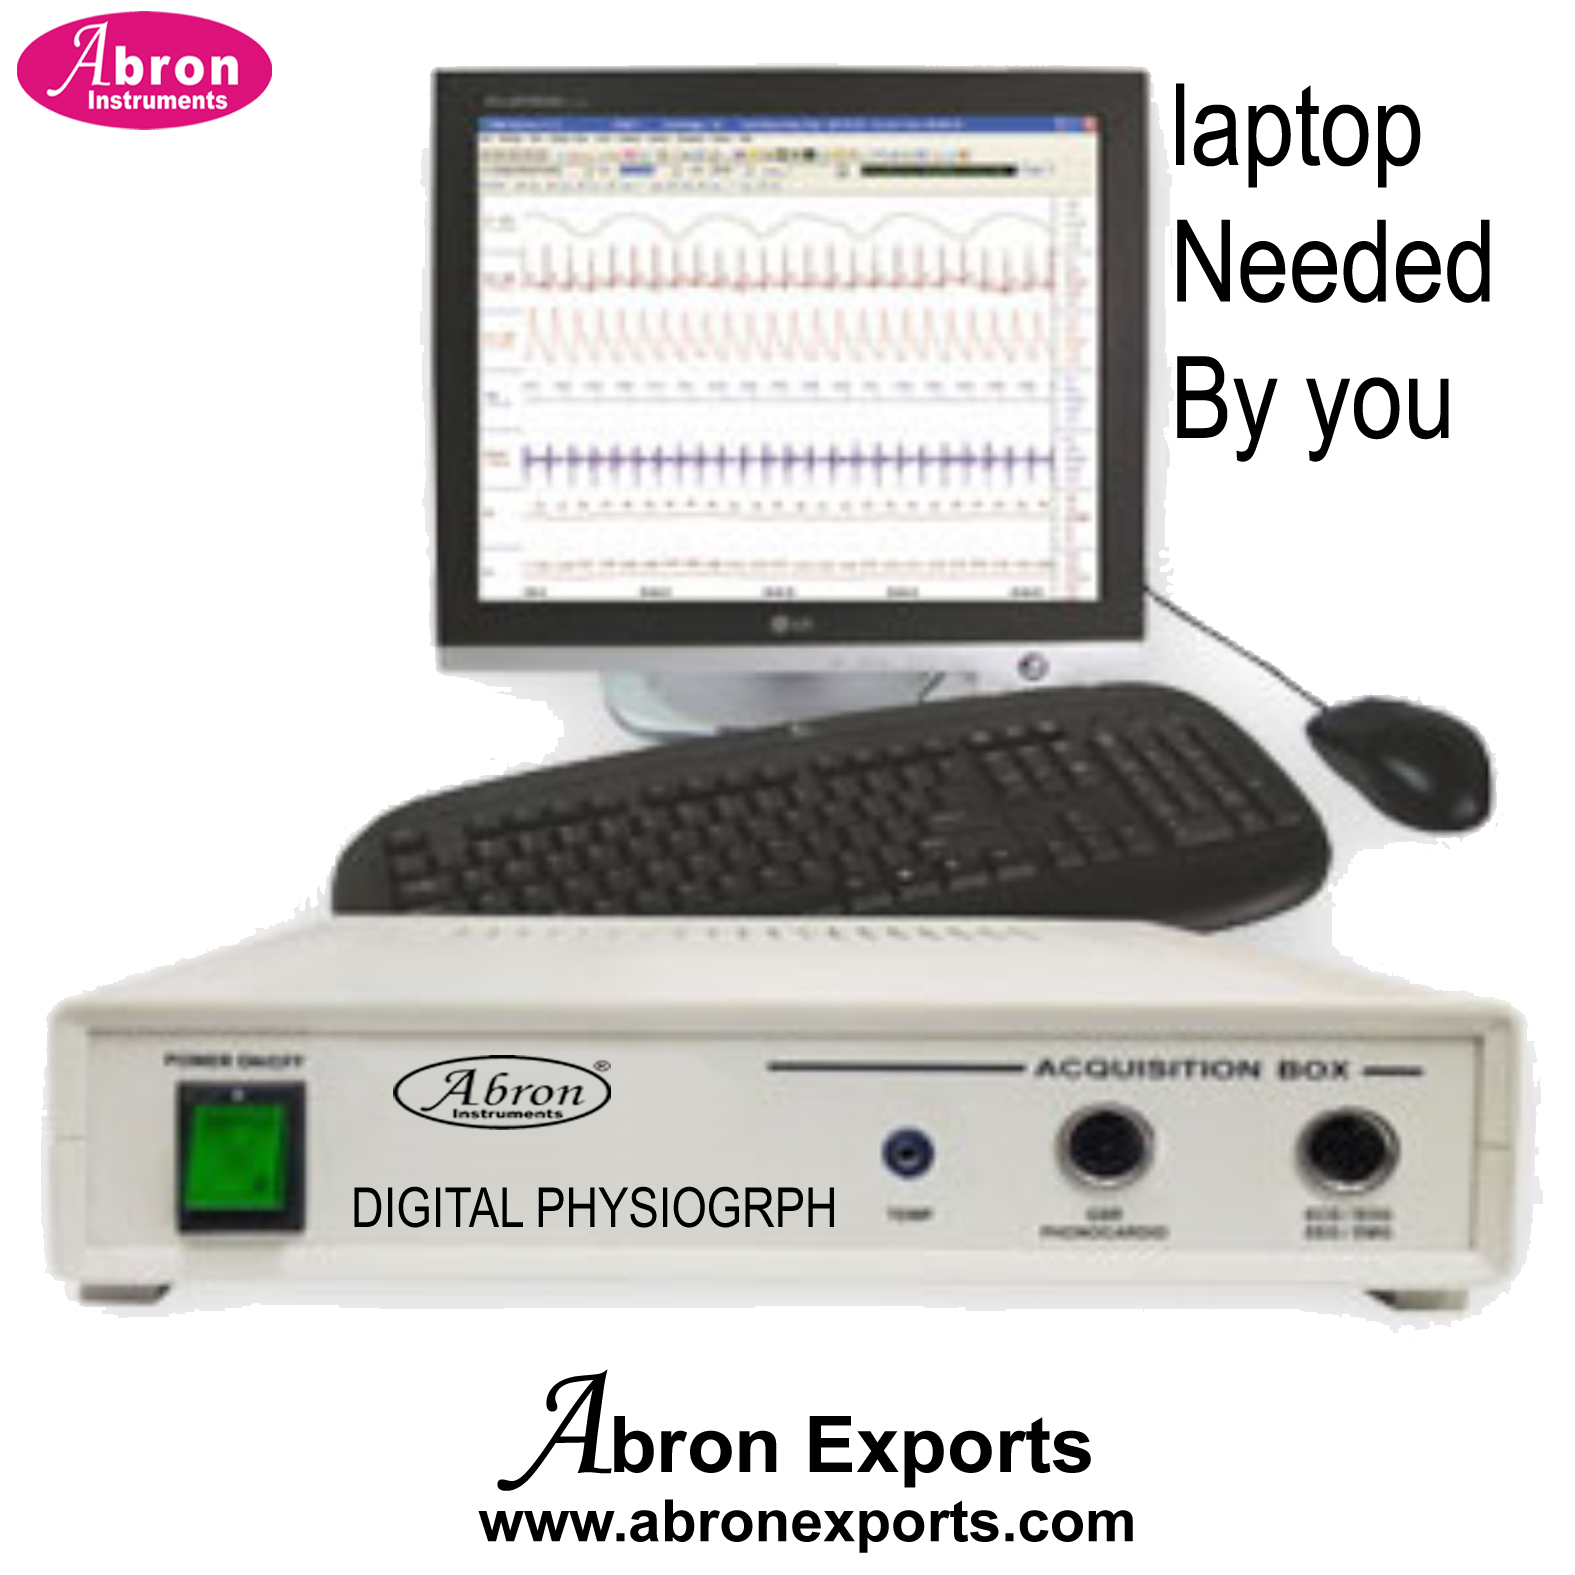 Polygraph Digital With 1 Channel With Software Connecting Truth Lie Detector Use Your Laptop Abron ABM-2501P1 